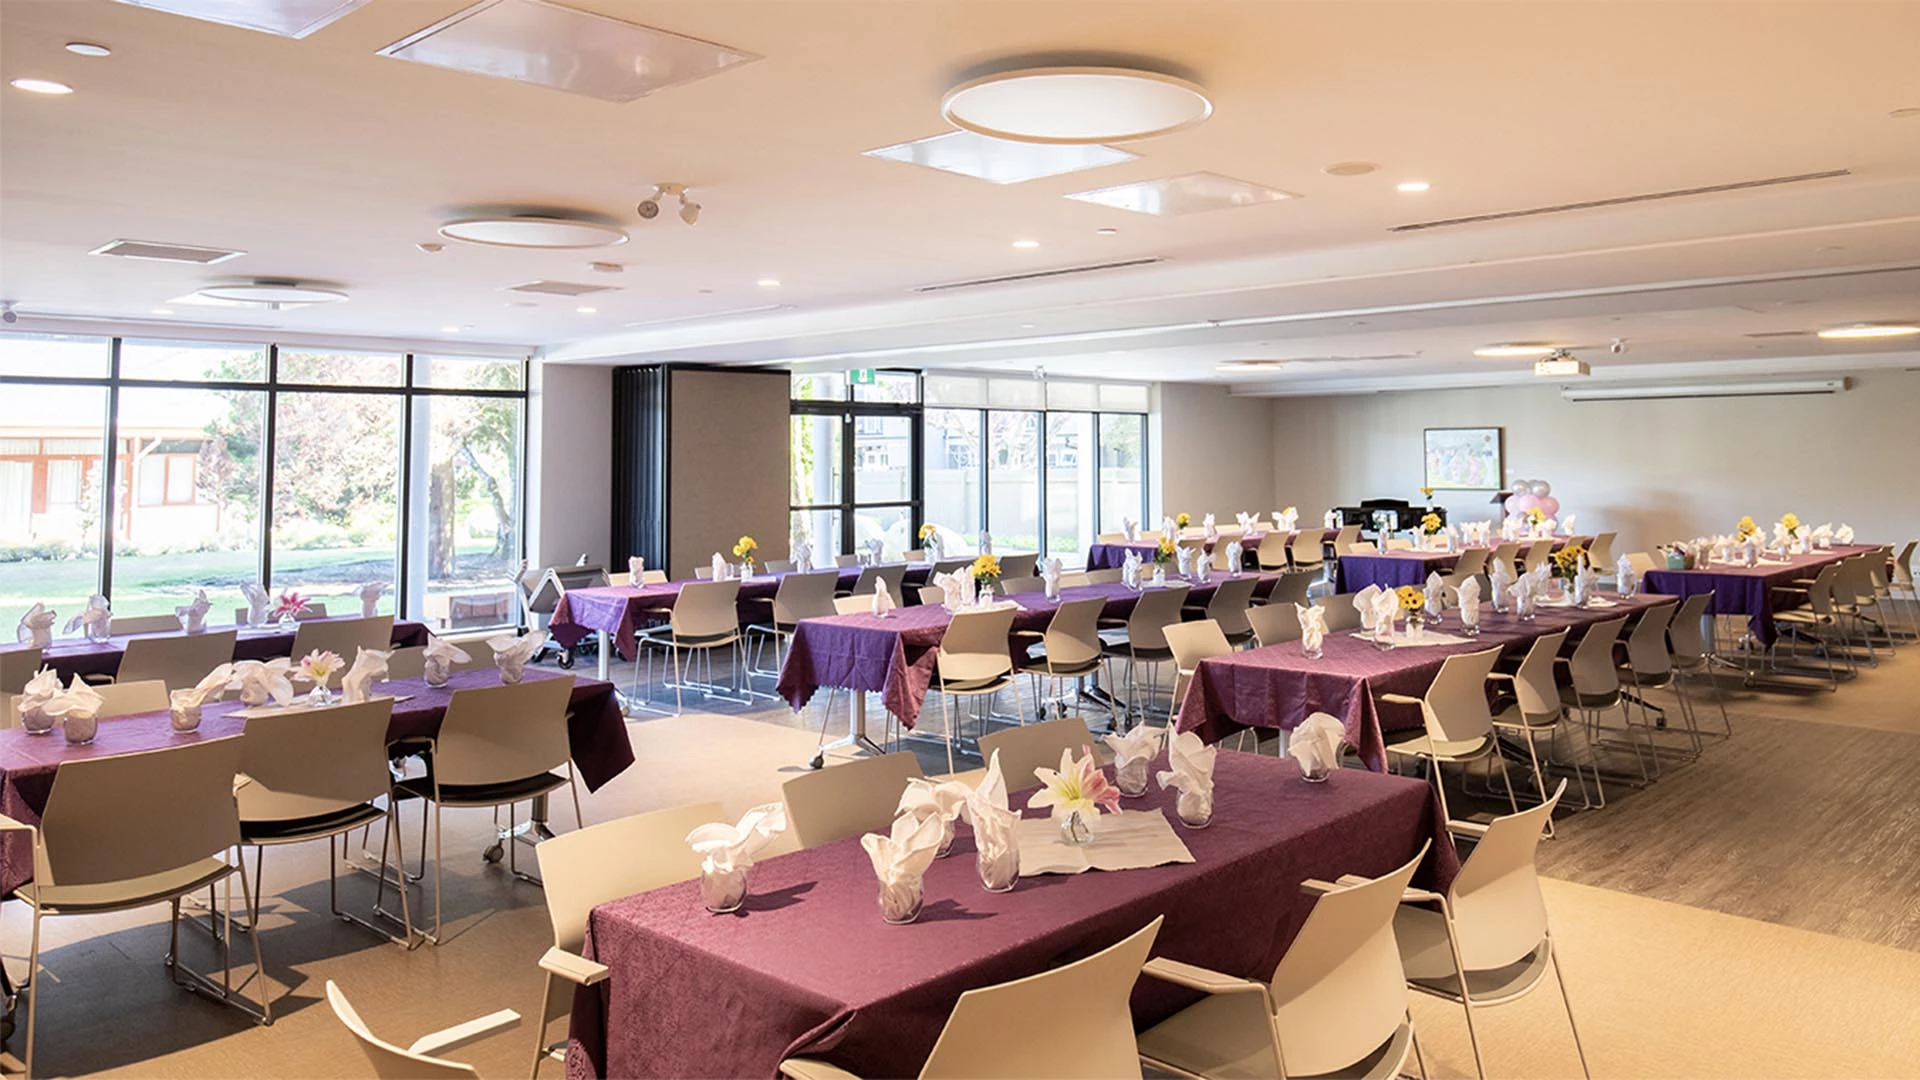 A large dining area with white chairs and purple clothes on tables